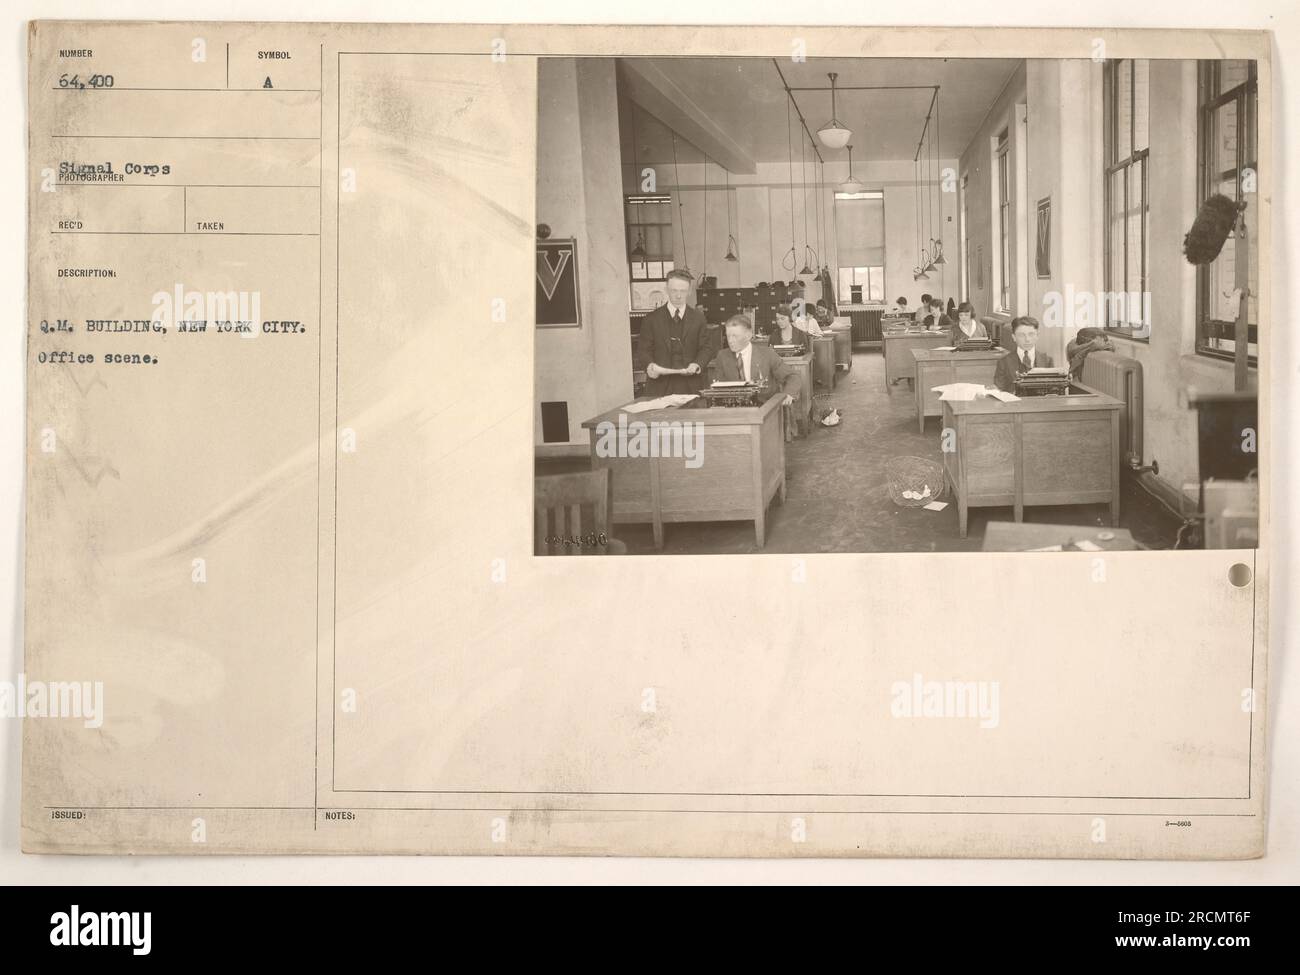 The image shows an office scene inside the Q.M. Building in New York City during World War One. This particular photo has the identification number 64,400 and was recorded and described by the Corps. The photograph captures a typical office environment within the building. Stock Photo